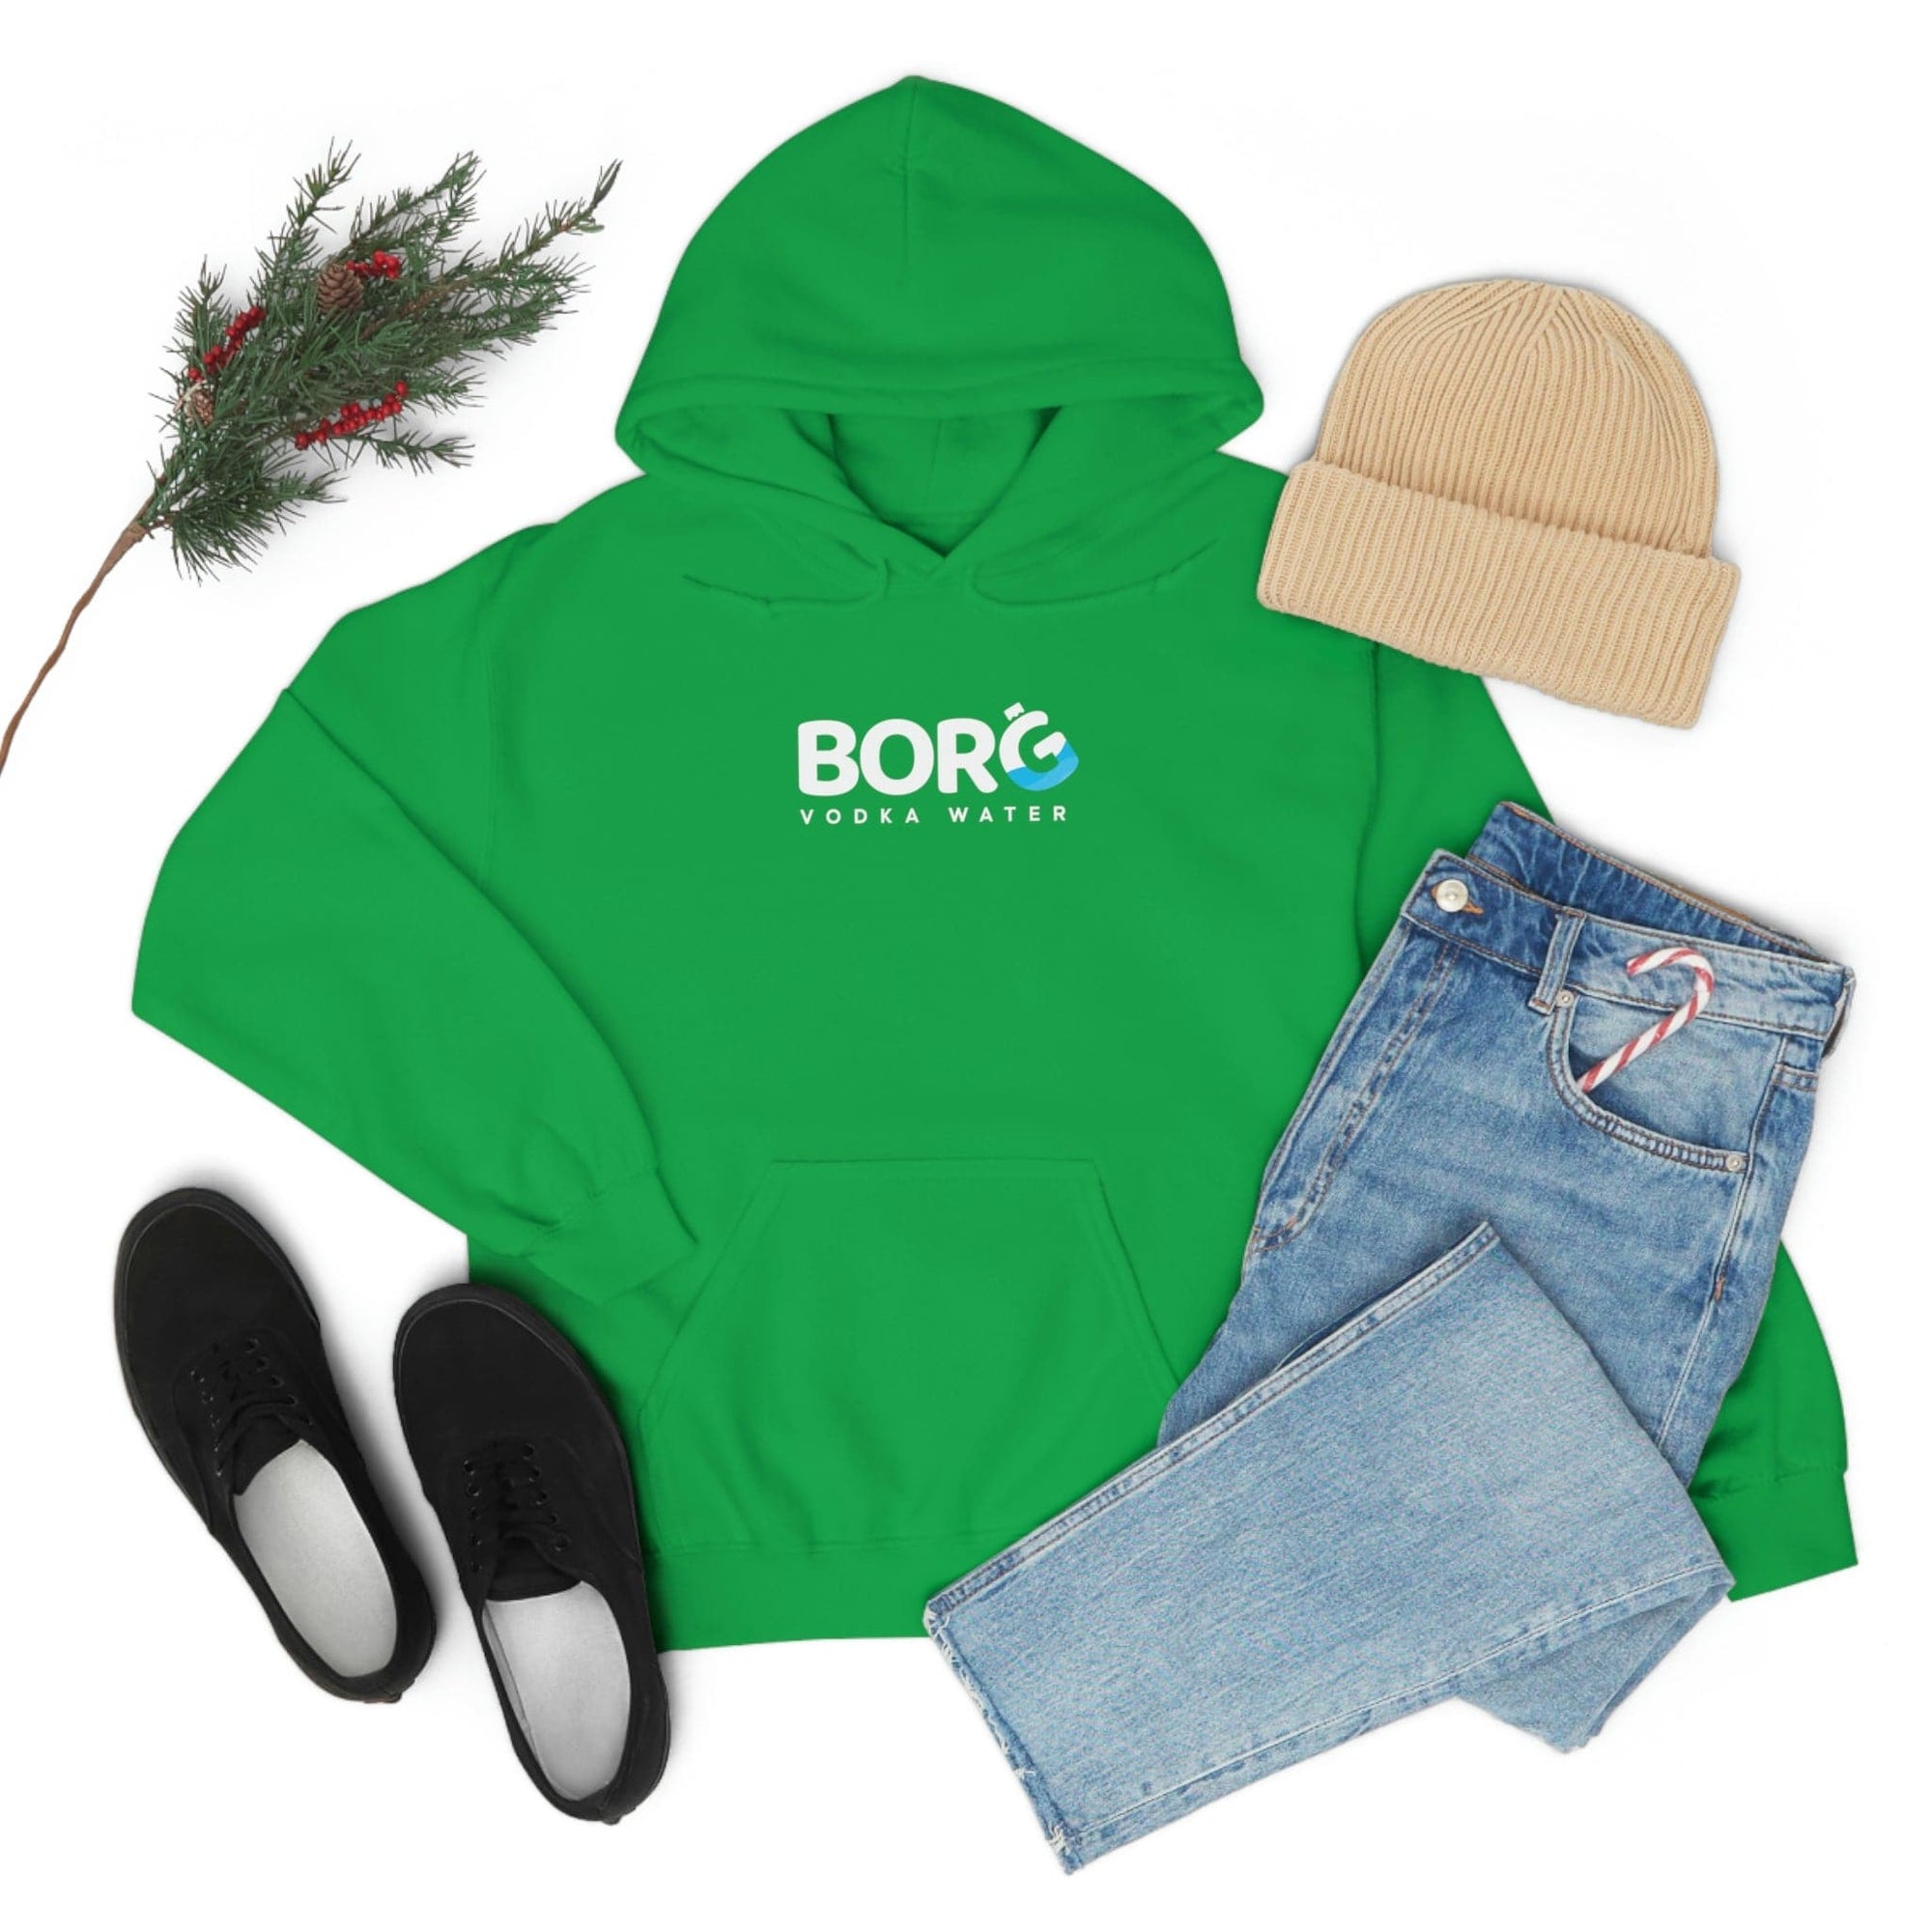  Borg Green Hooded Sweatshirt and Accessories